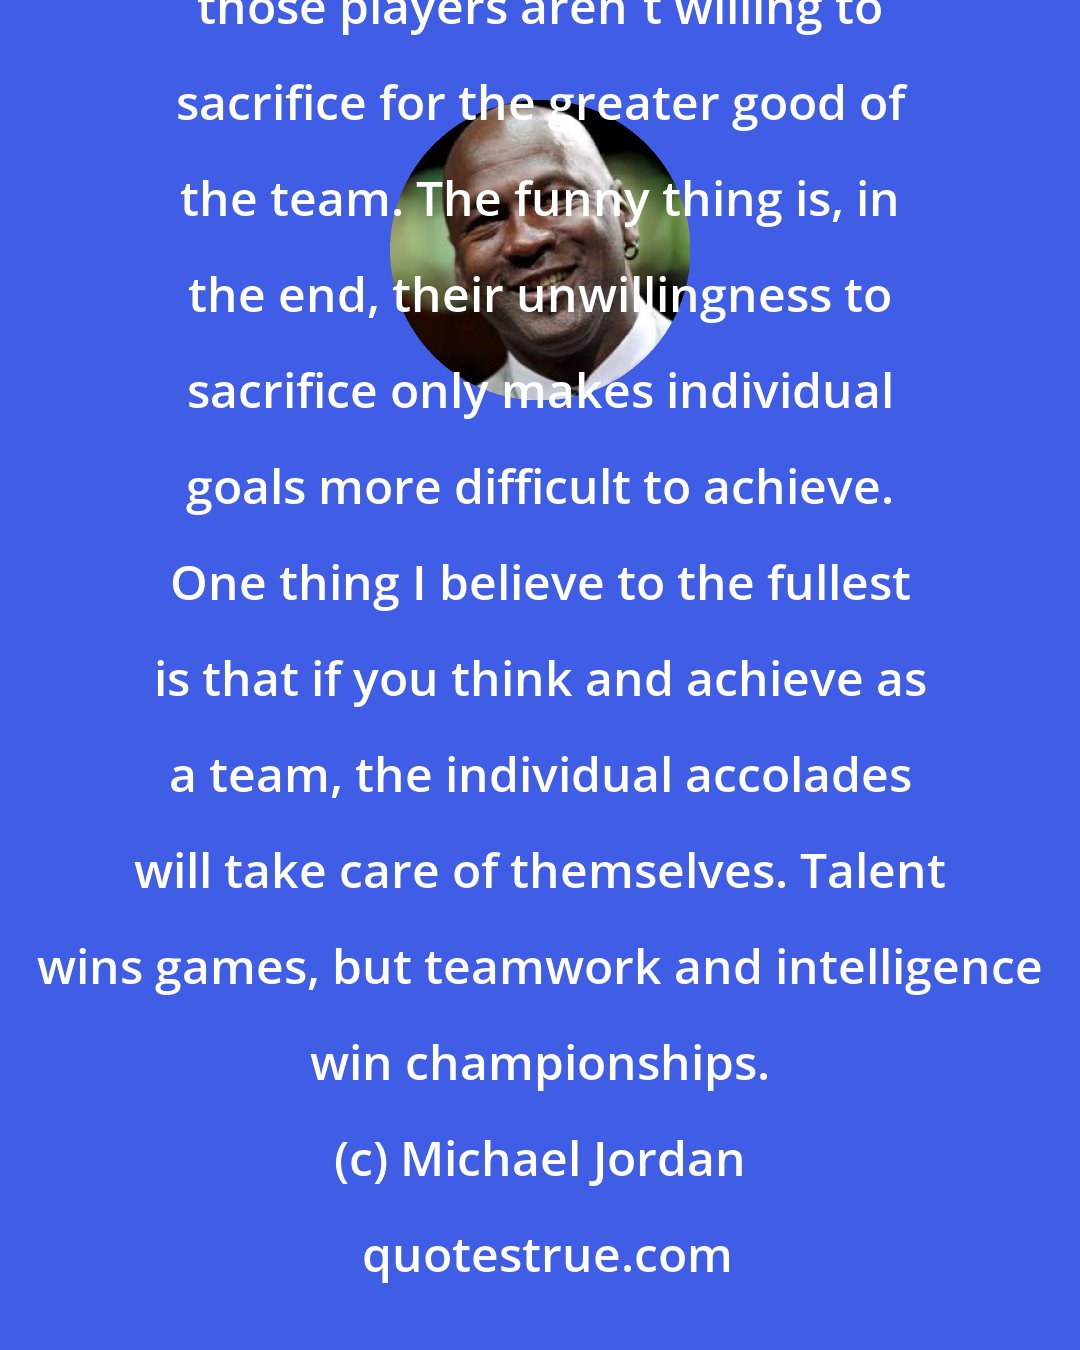 Michael Jordan: There are plenty of teams in every sport that have great players and never win titles. Most of the time, those players aren't willing to sacrifice for the greater good of the team. The funny thing is, in the end, their unwillingness to sacrifice only makes individual goals more difficult to achieve. One thing I believe to the fullest is that if you think and achieve as a team, the individual accolades will take care of themselves. Talent wins games, but teamwork and intelligence win championships.